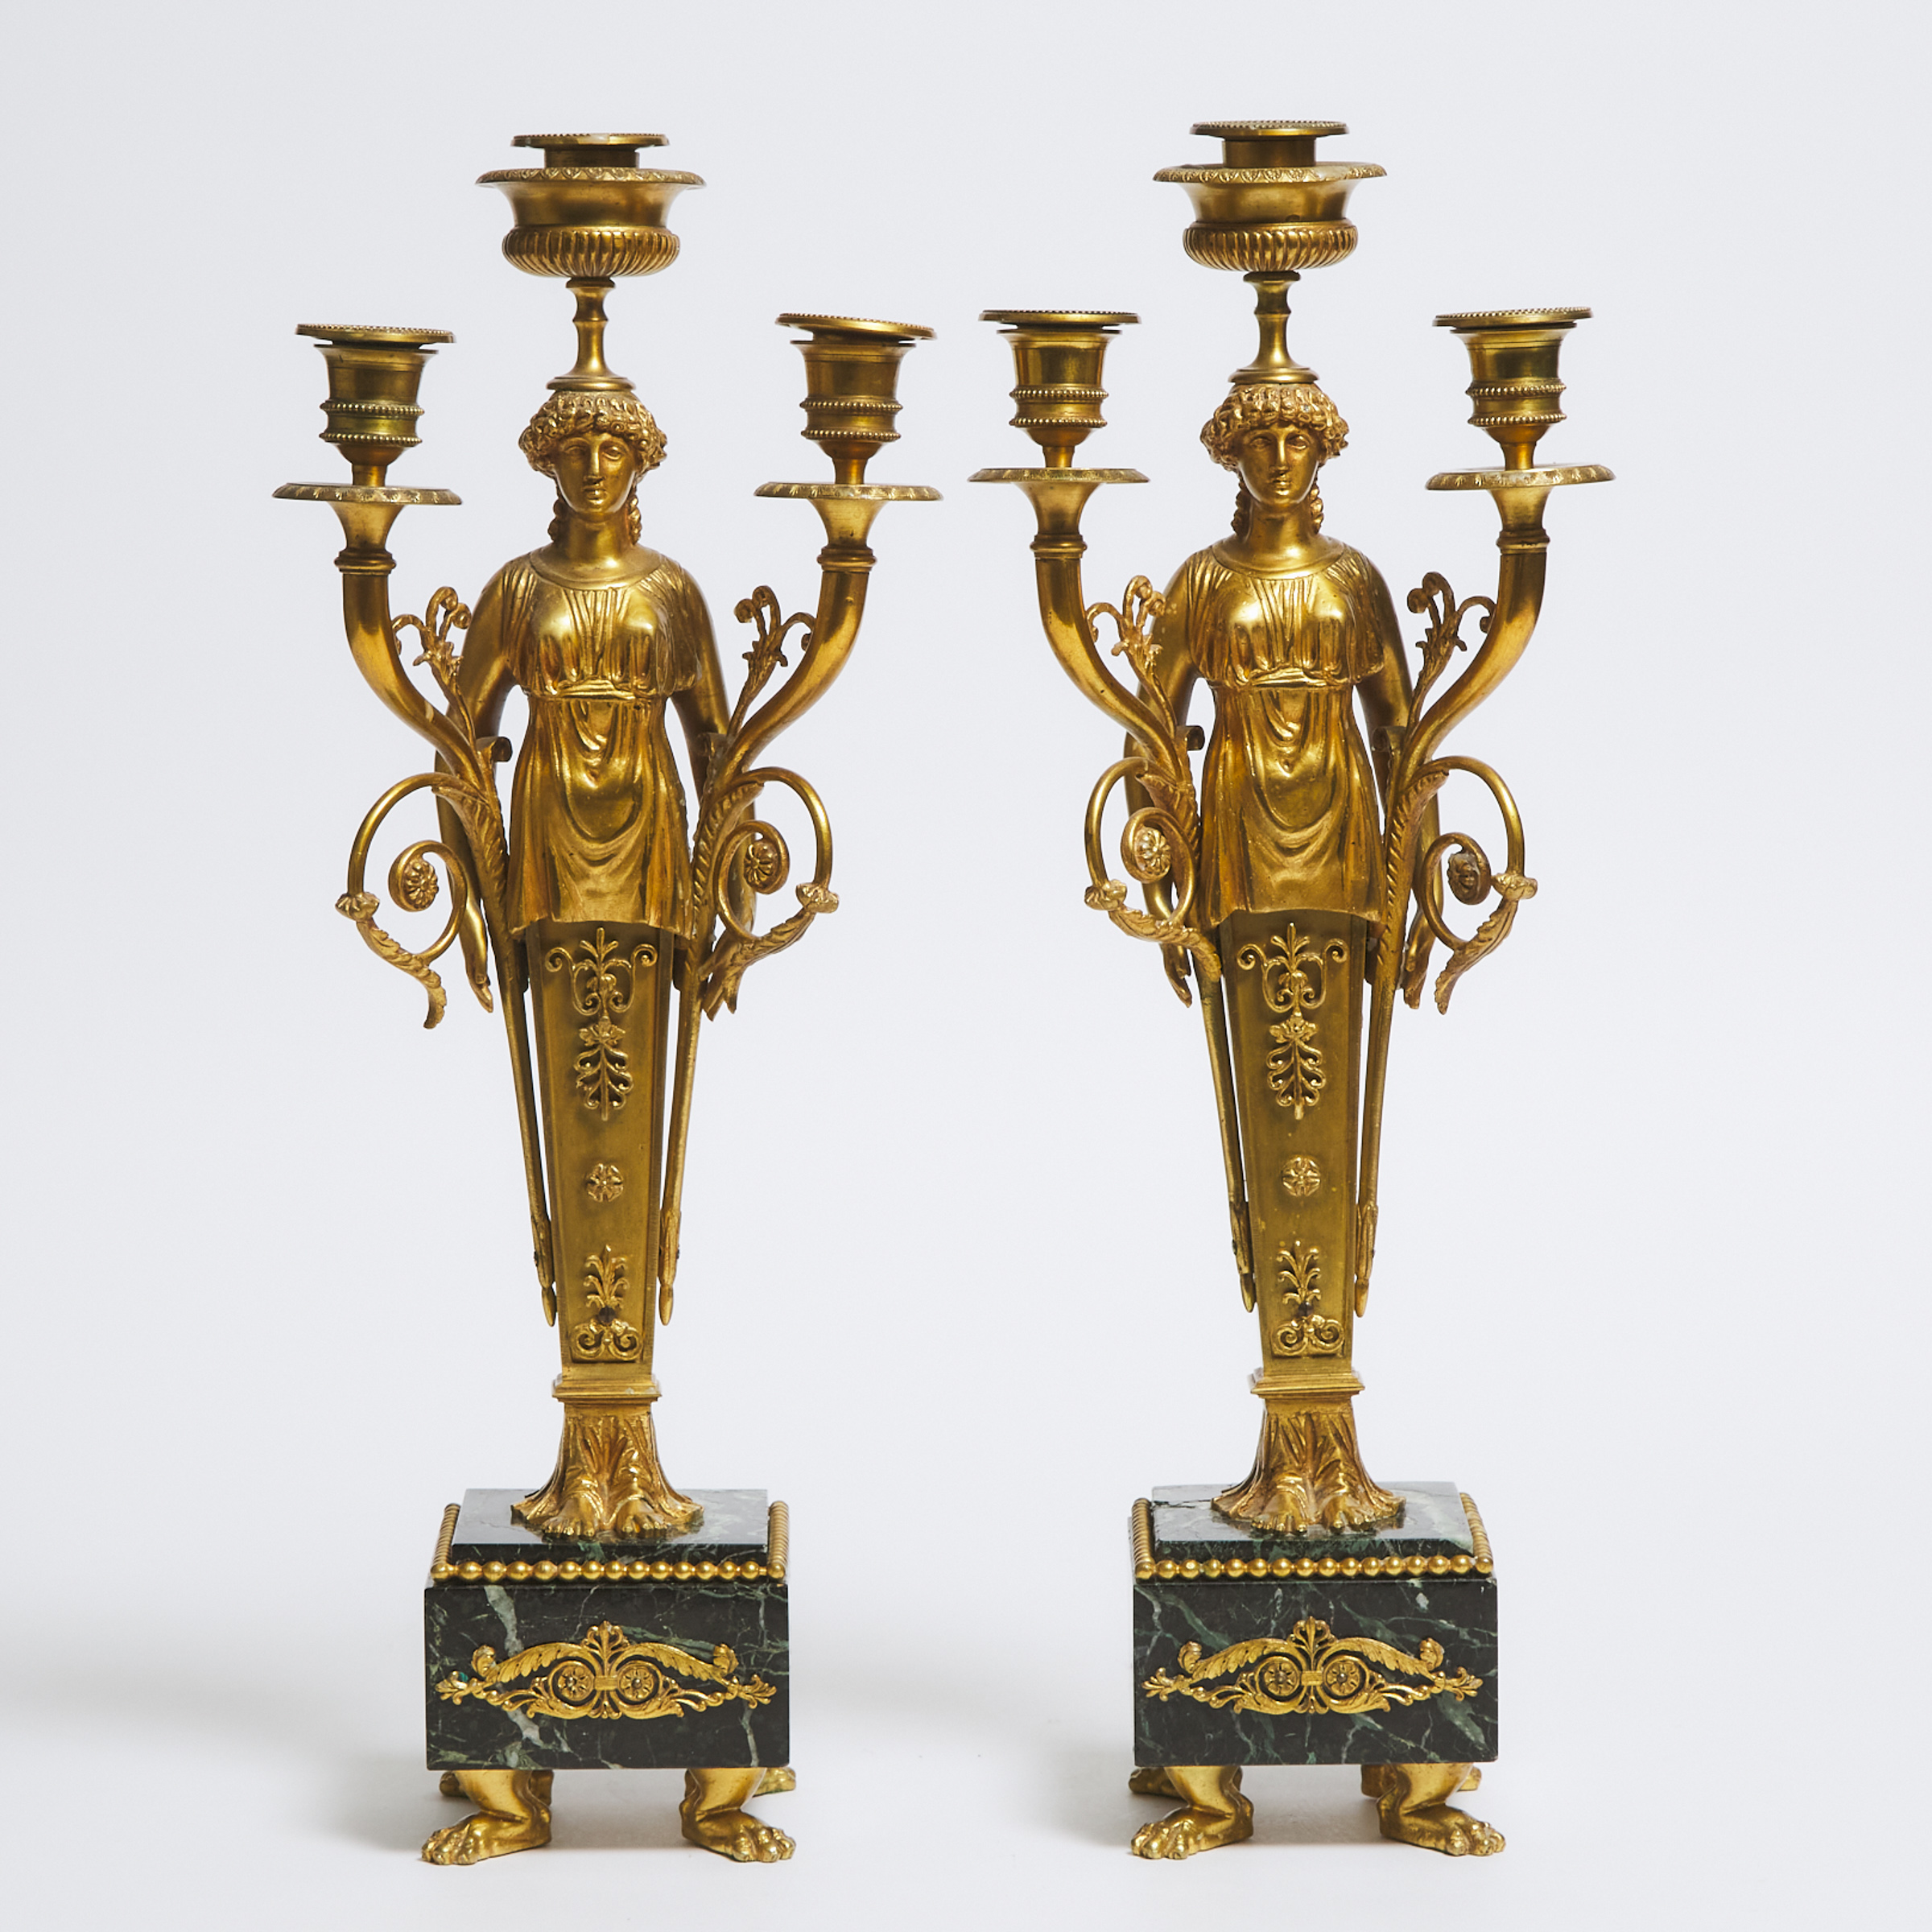 Pair of French Empire Style Gilt Bronze Figural Candelabra, early-mid 20th century